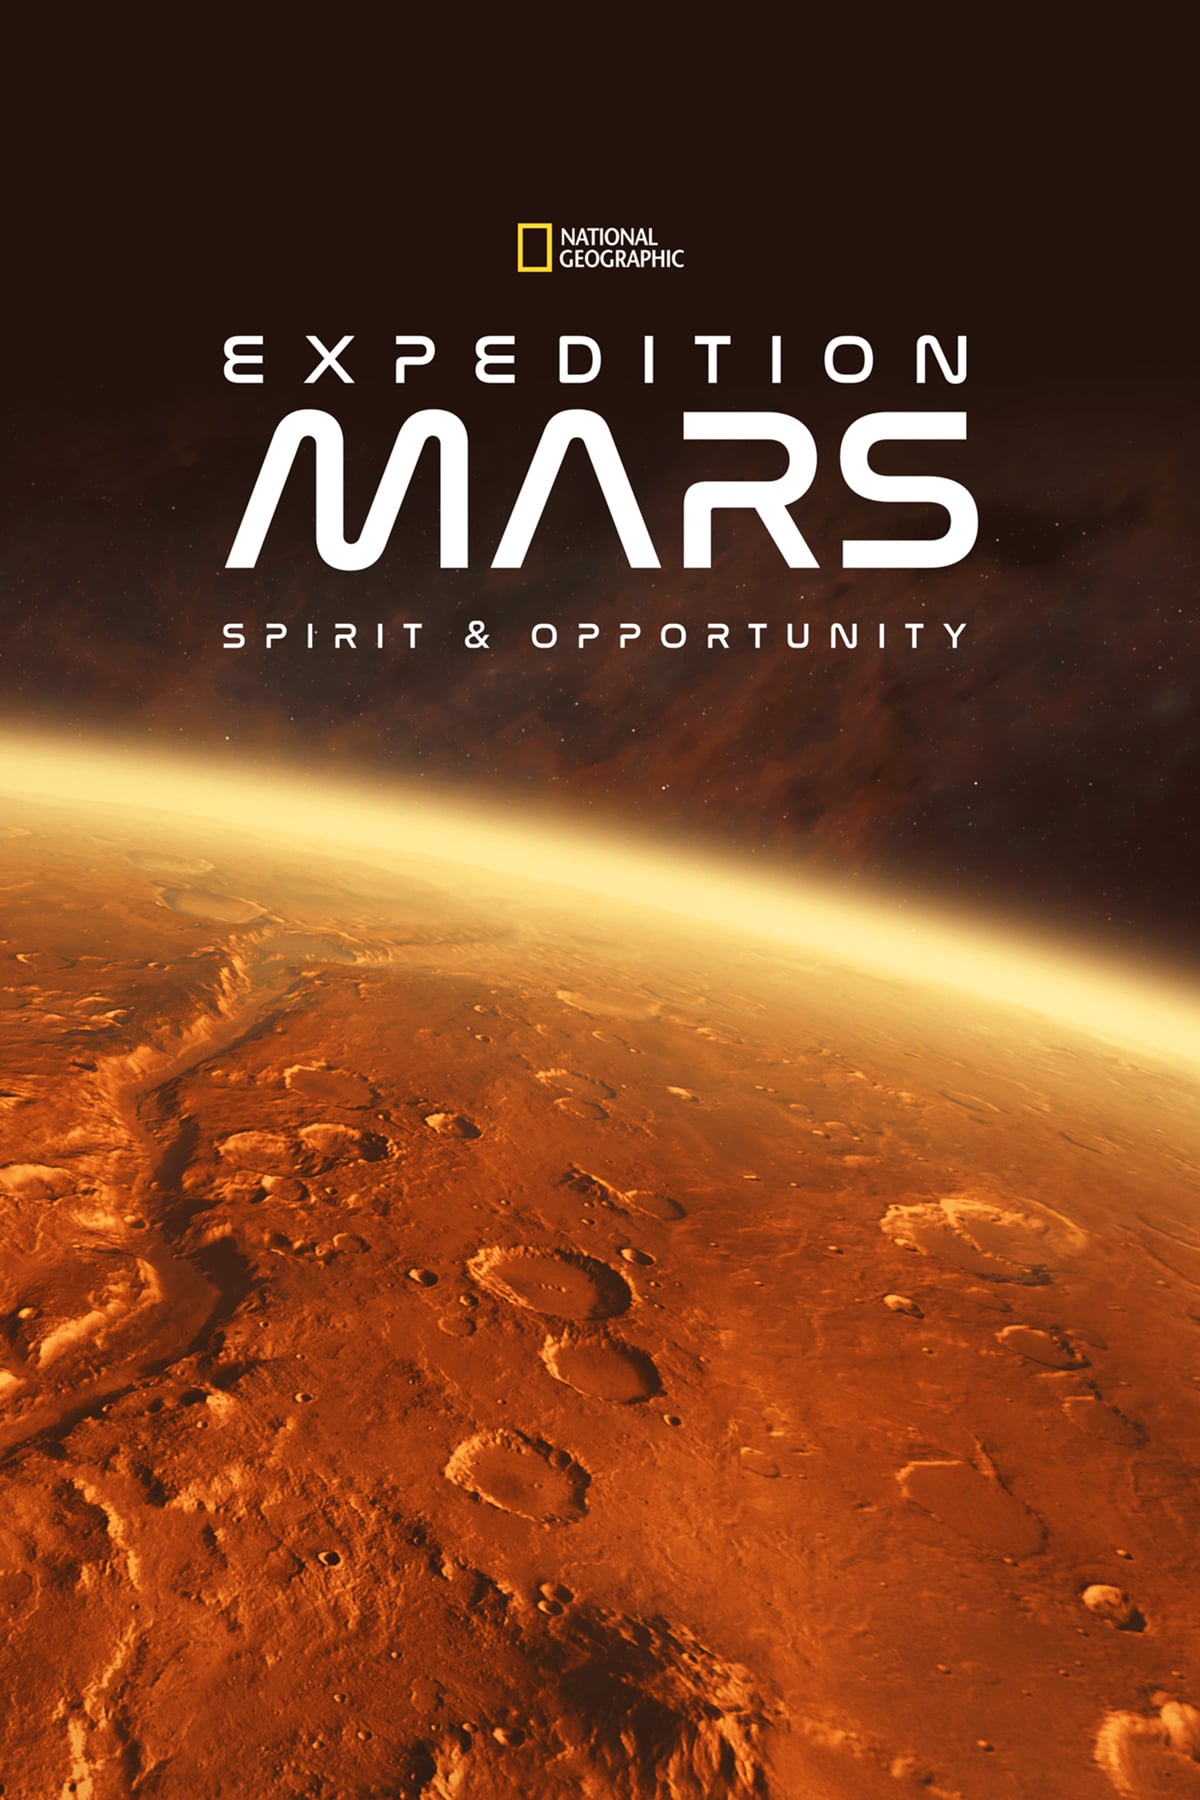 EXPEDITION MARS